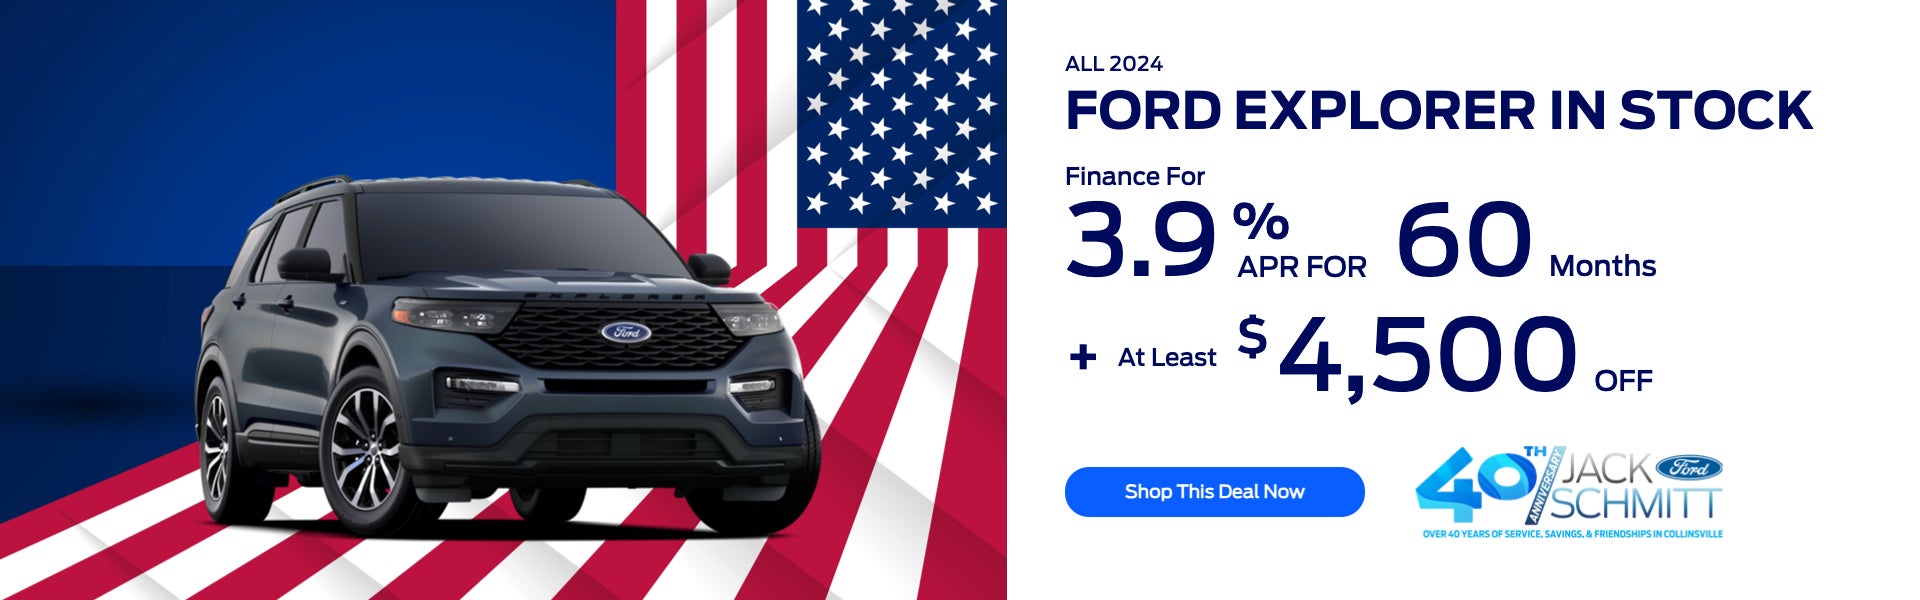 ALL 2024 FORD EXPLORER IN STOCK